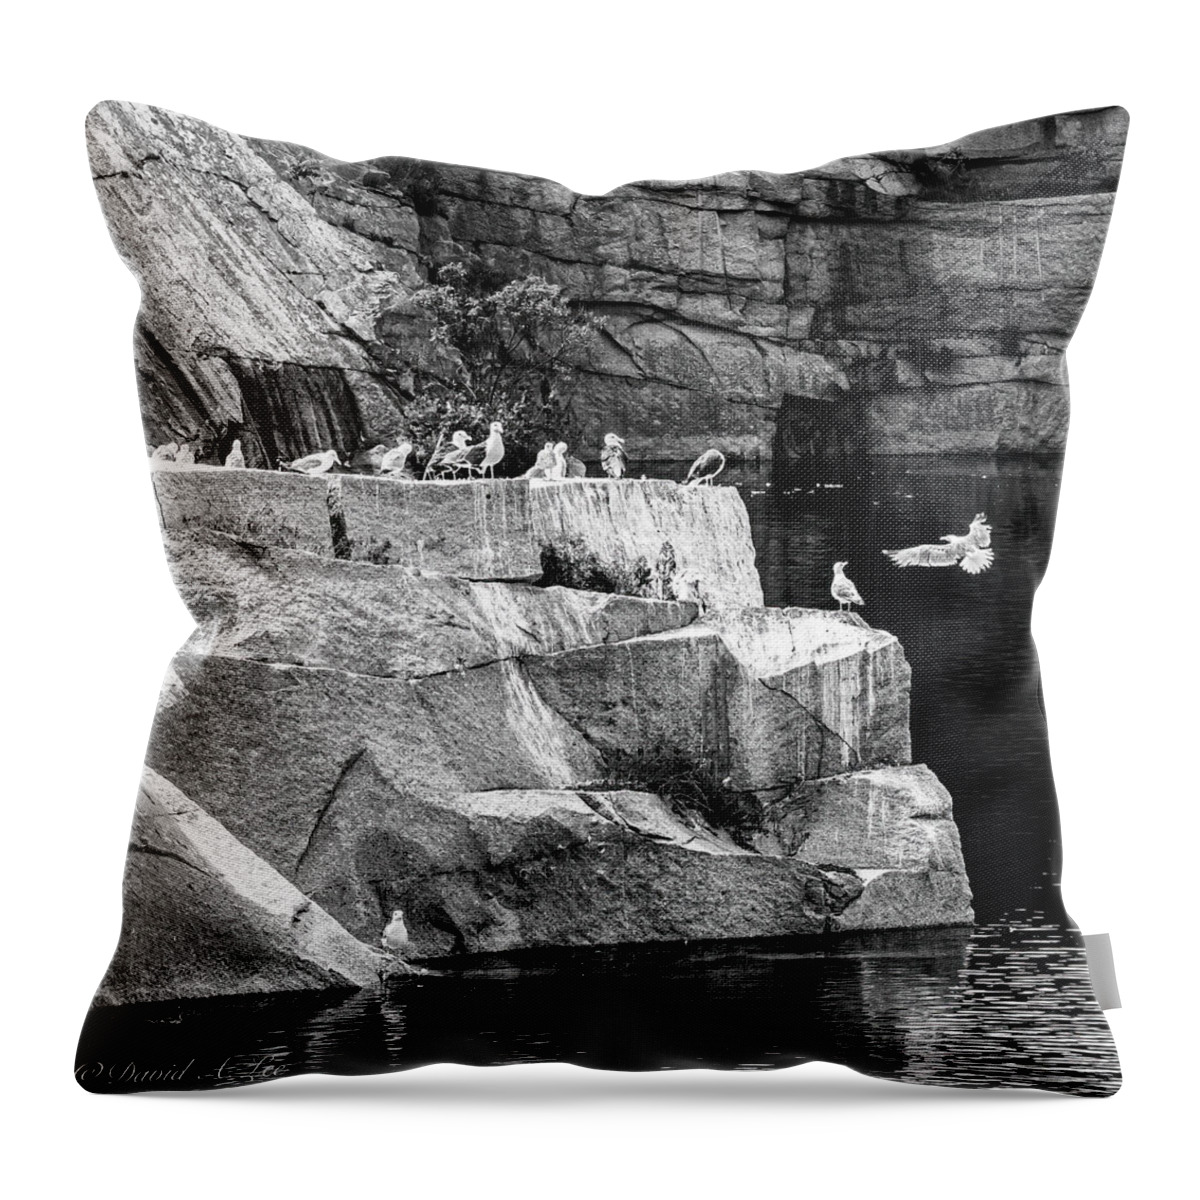 Seagulls Throw Pillow featuring the photograph Seagulls on Granite by David Lee